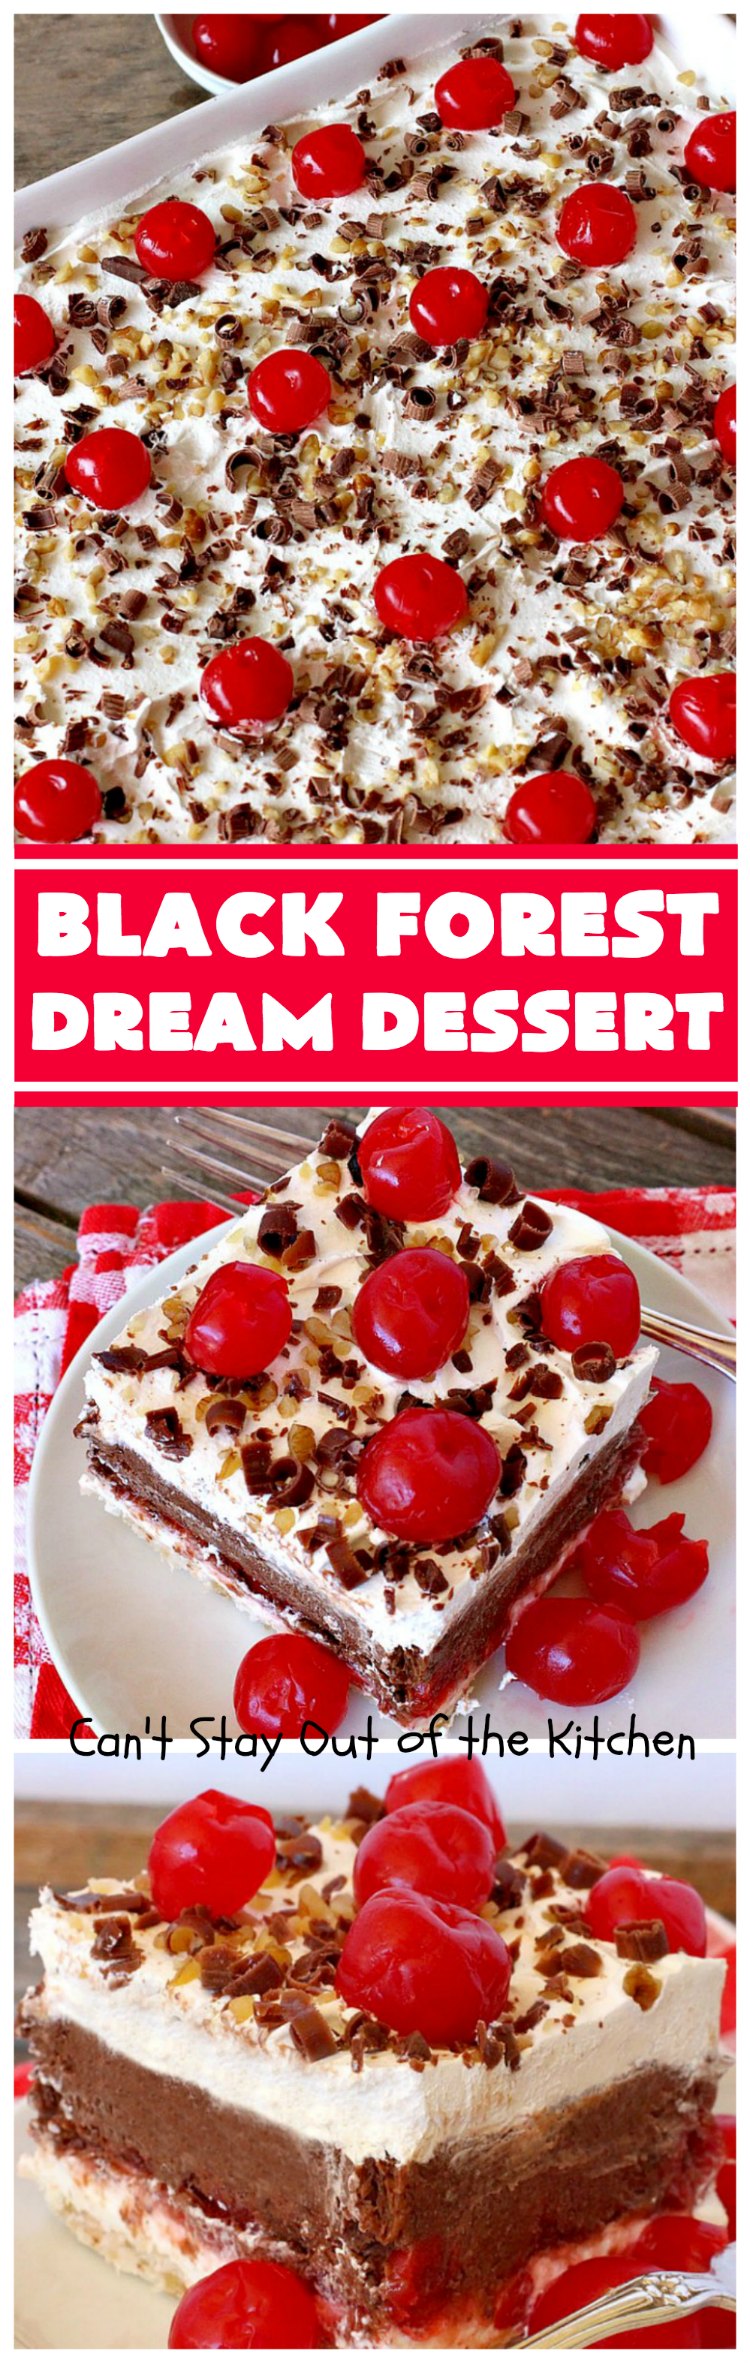 Black Forest Dream Dessert | Can't Stay Out of the Kitchen | this spectacular #dessert has a crust layer with #pecans & #coconut. It also has #cheesecake layer, a #cherrypiefilling layer, a vanilla pudding layer with melted #chocolatechips added, & a top layer with #CoolWhip, #maraschinocherries, #chocolate curls & chopped #pecans. Absolutely divine! #BlackForestDessert #CherryDessert #ChocolateDessert #ValentinesDay #ValentinesDayDessert #ChristmasDessert #CheesecakeDessert